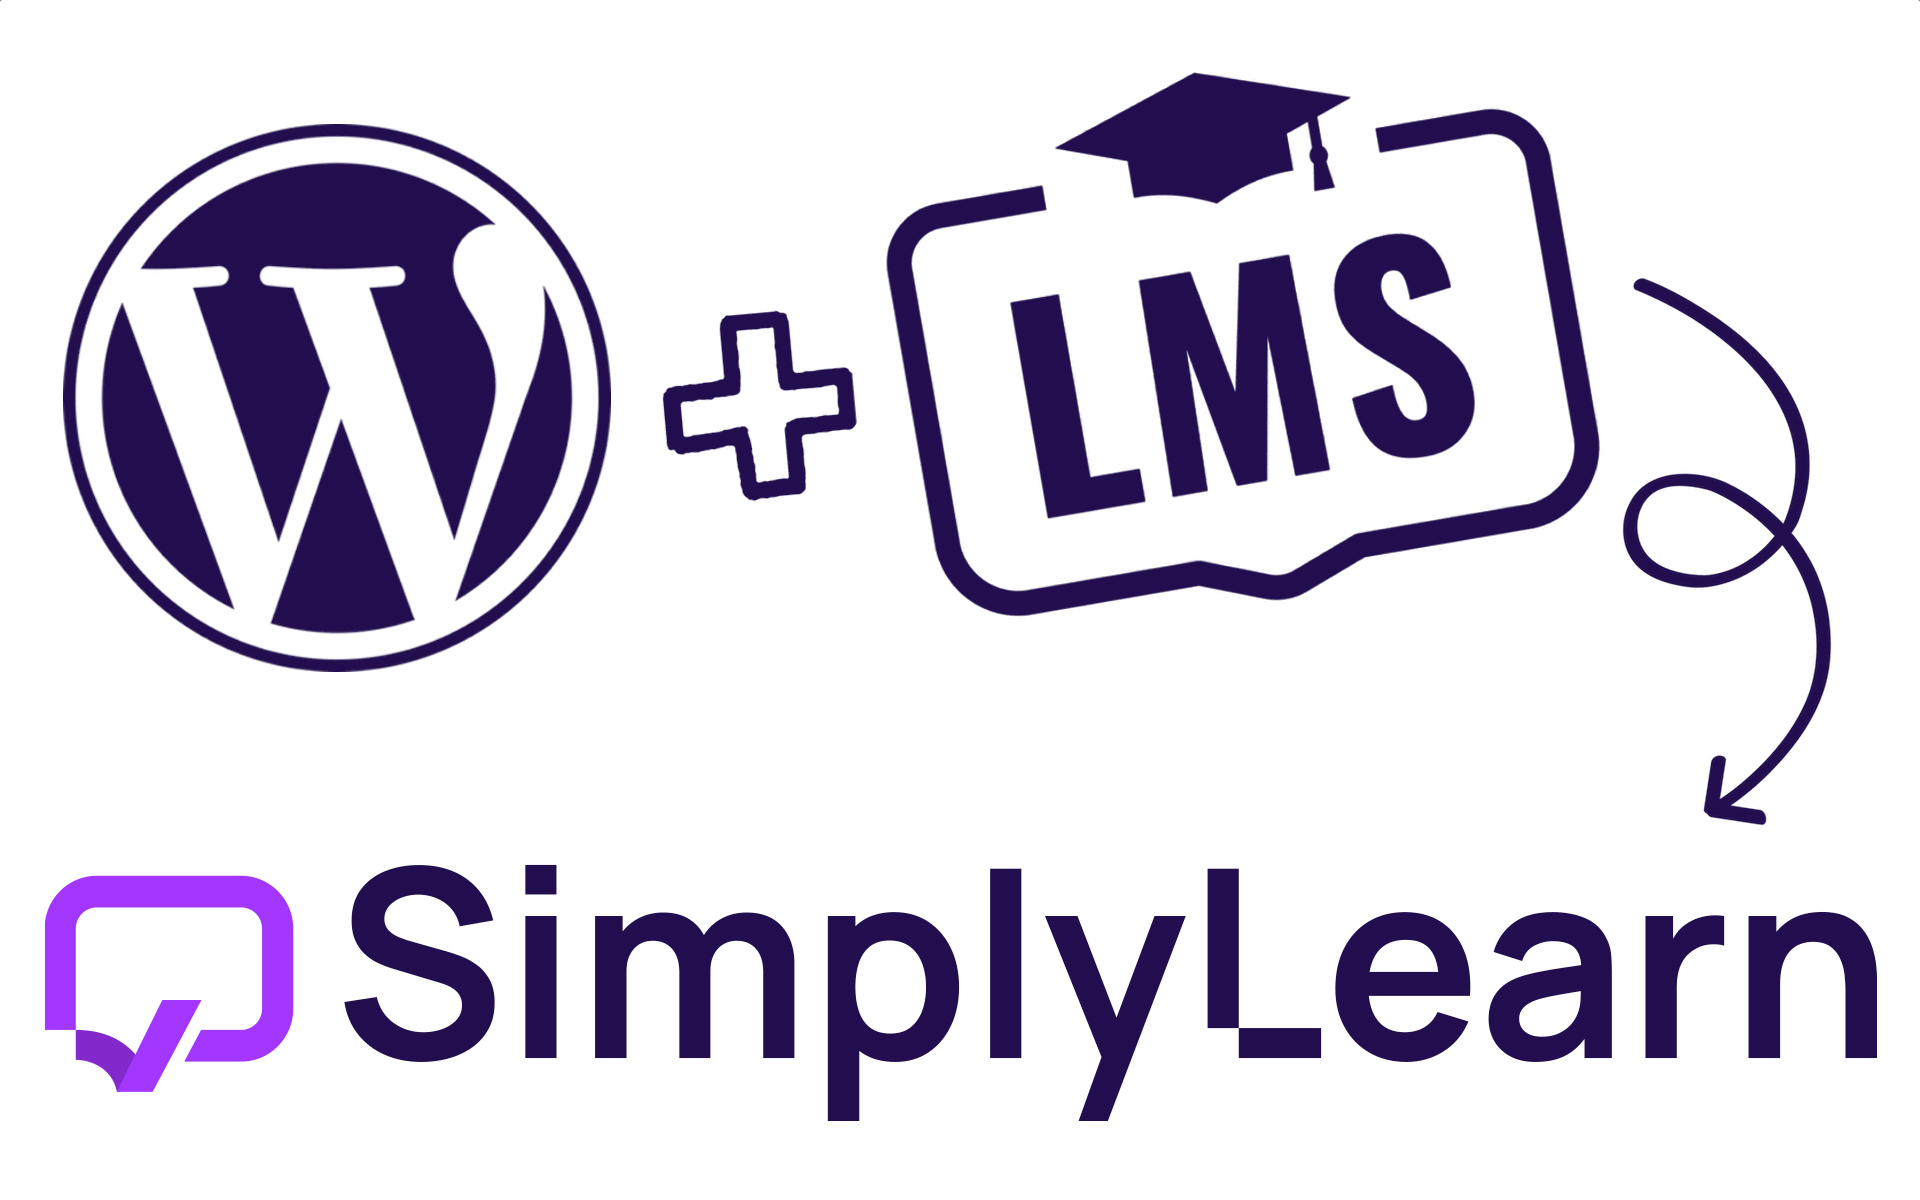 SimplyLearn is a learning management system built on WordPress